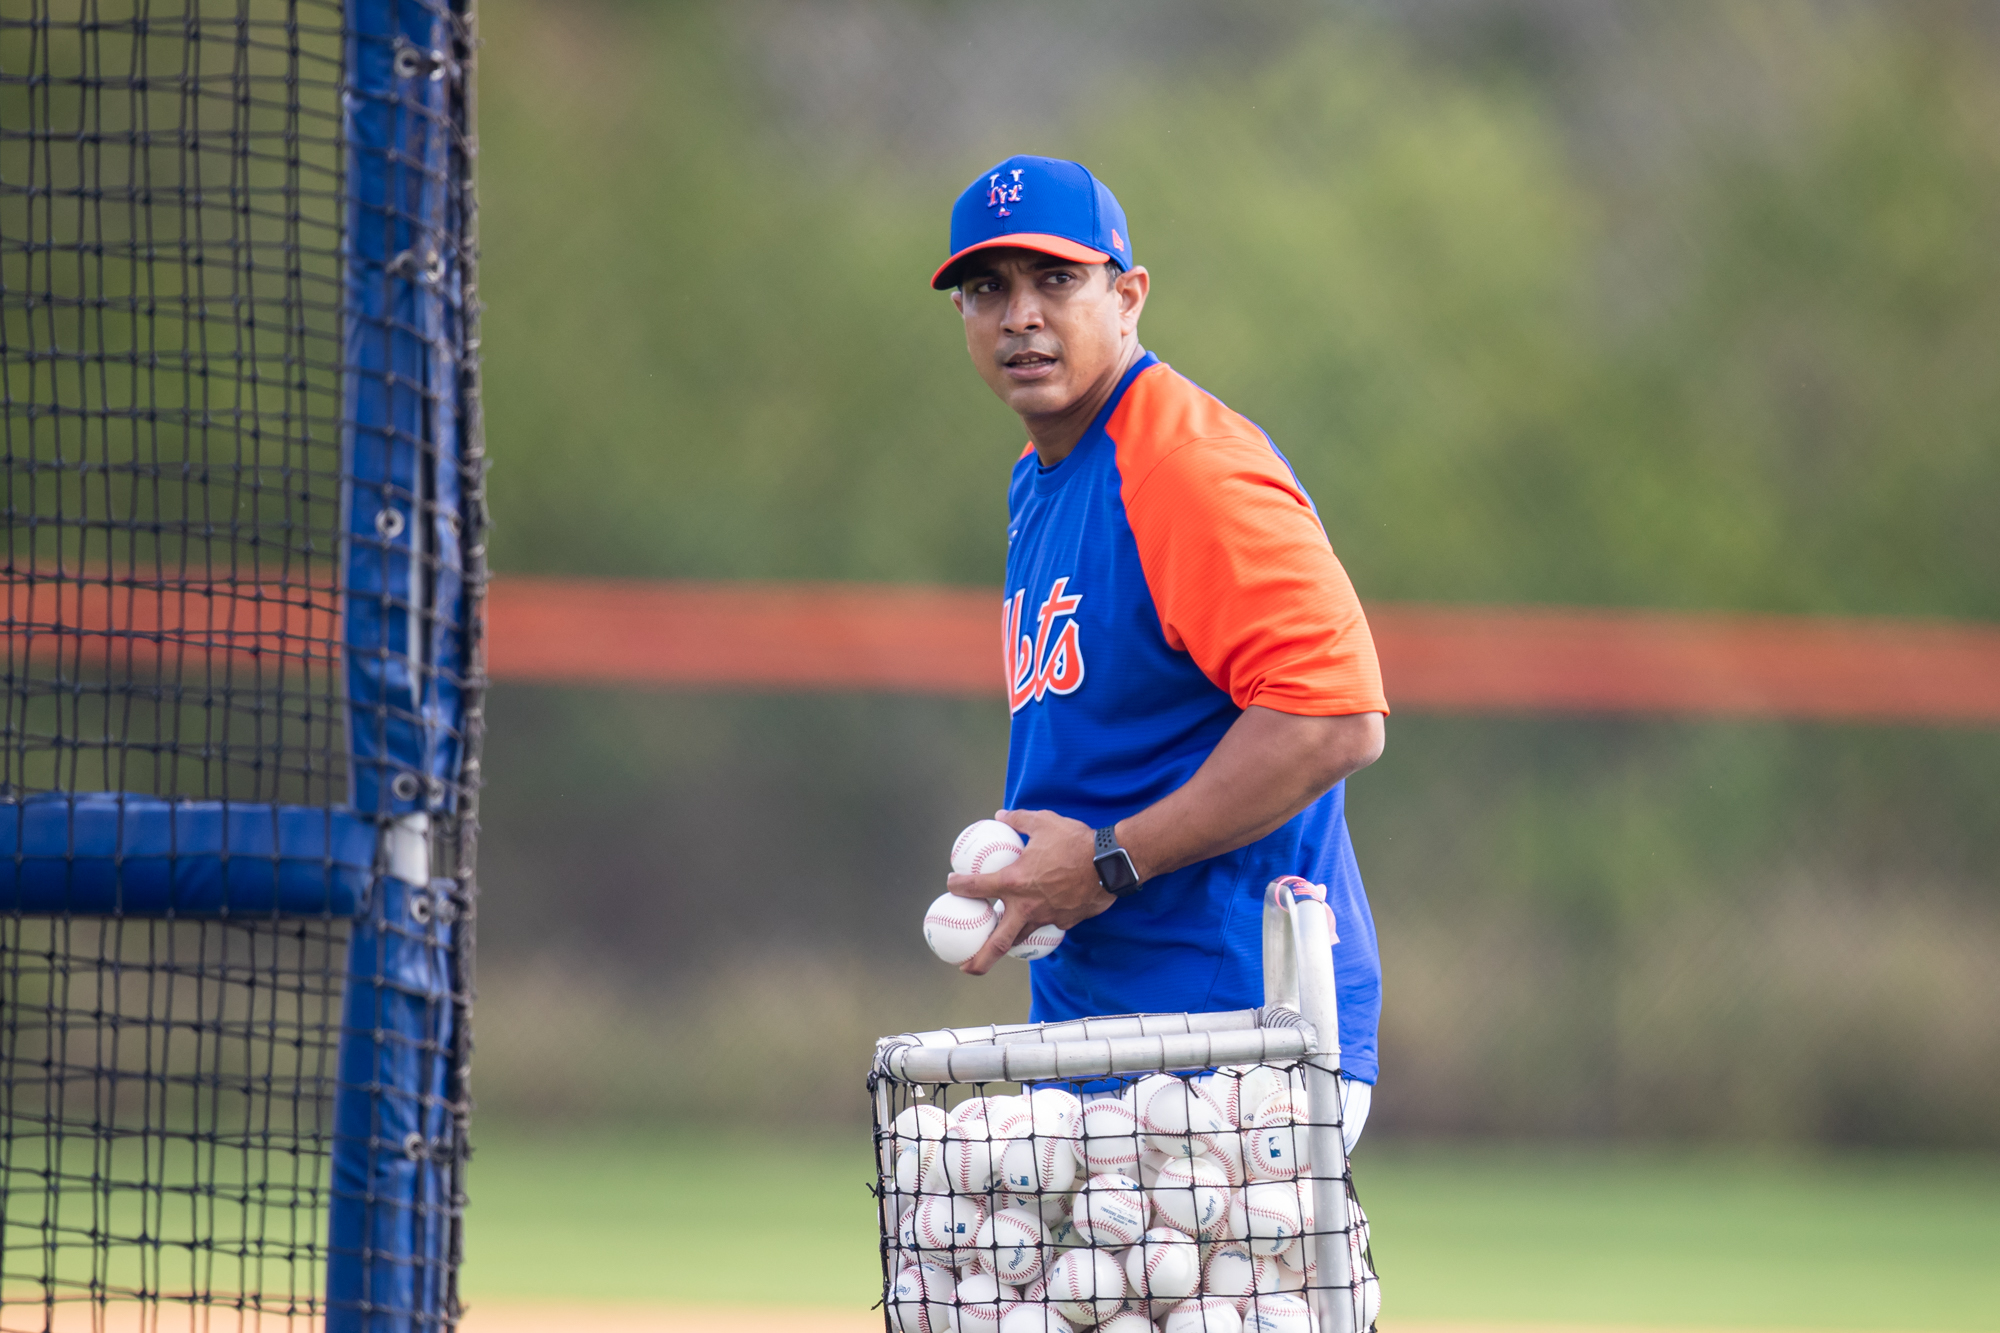 Luis Rojas out as Mets manager after 2 seasons